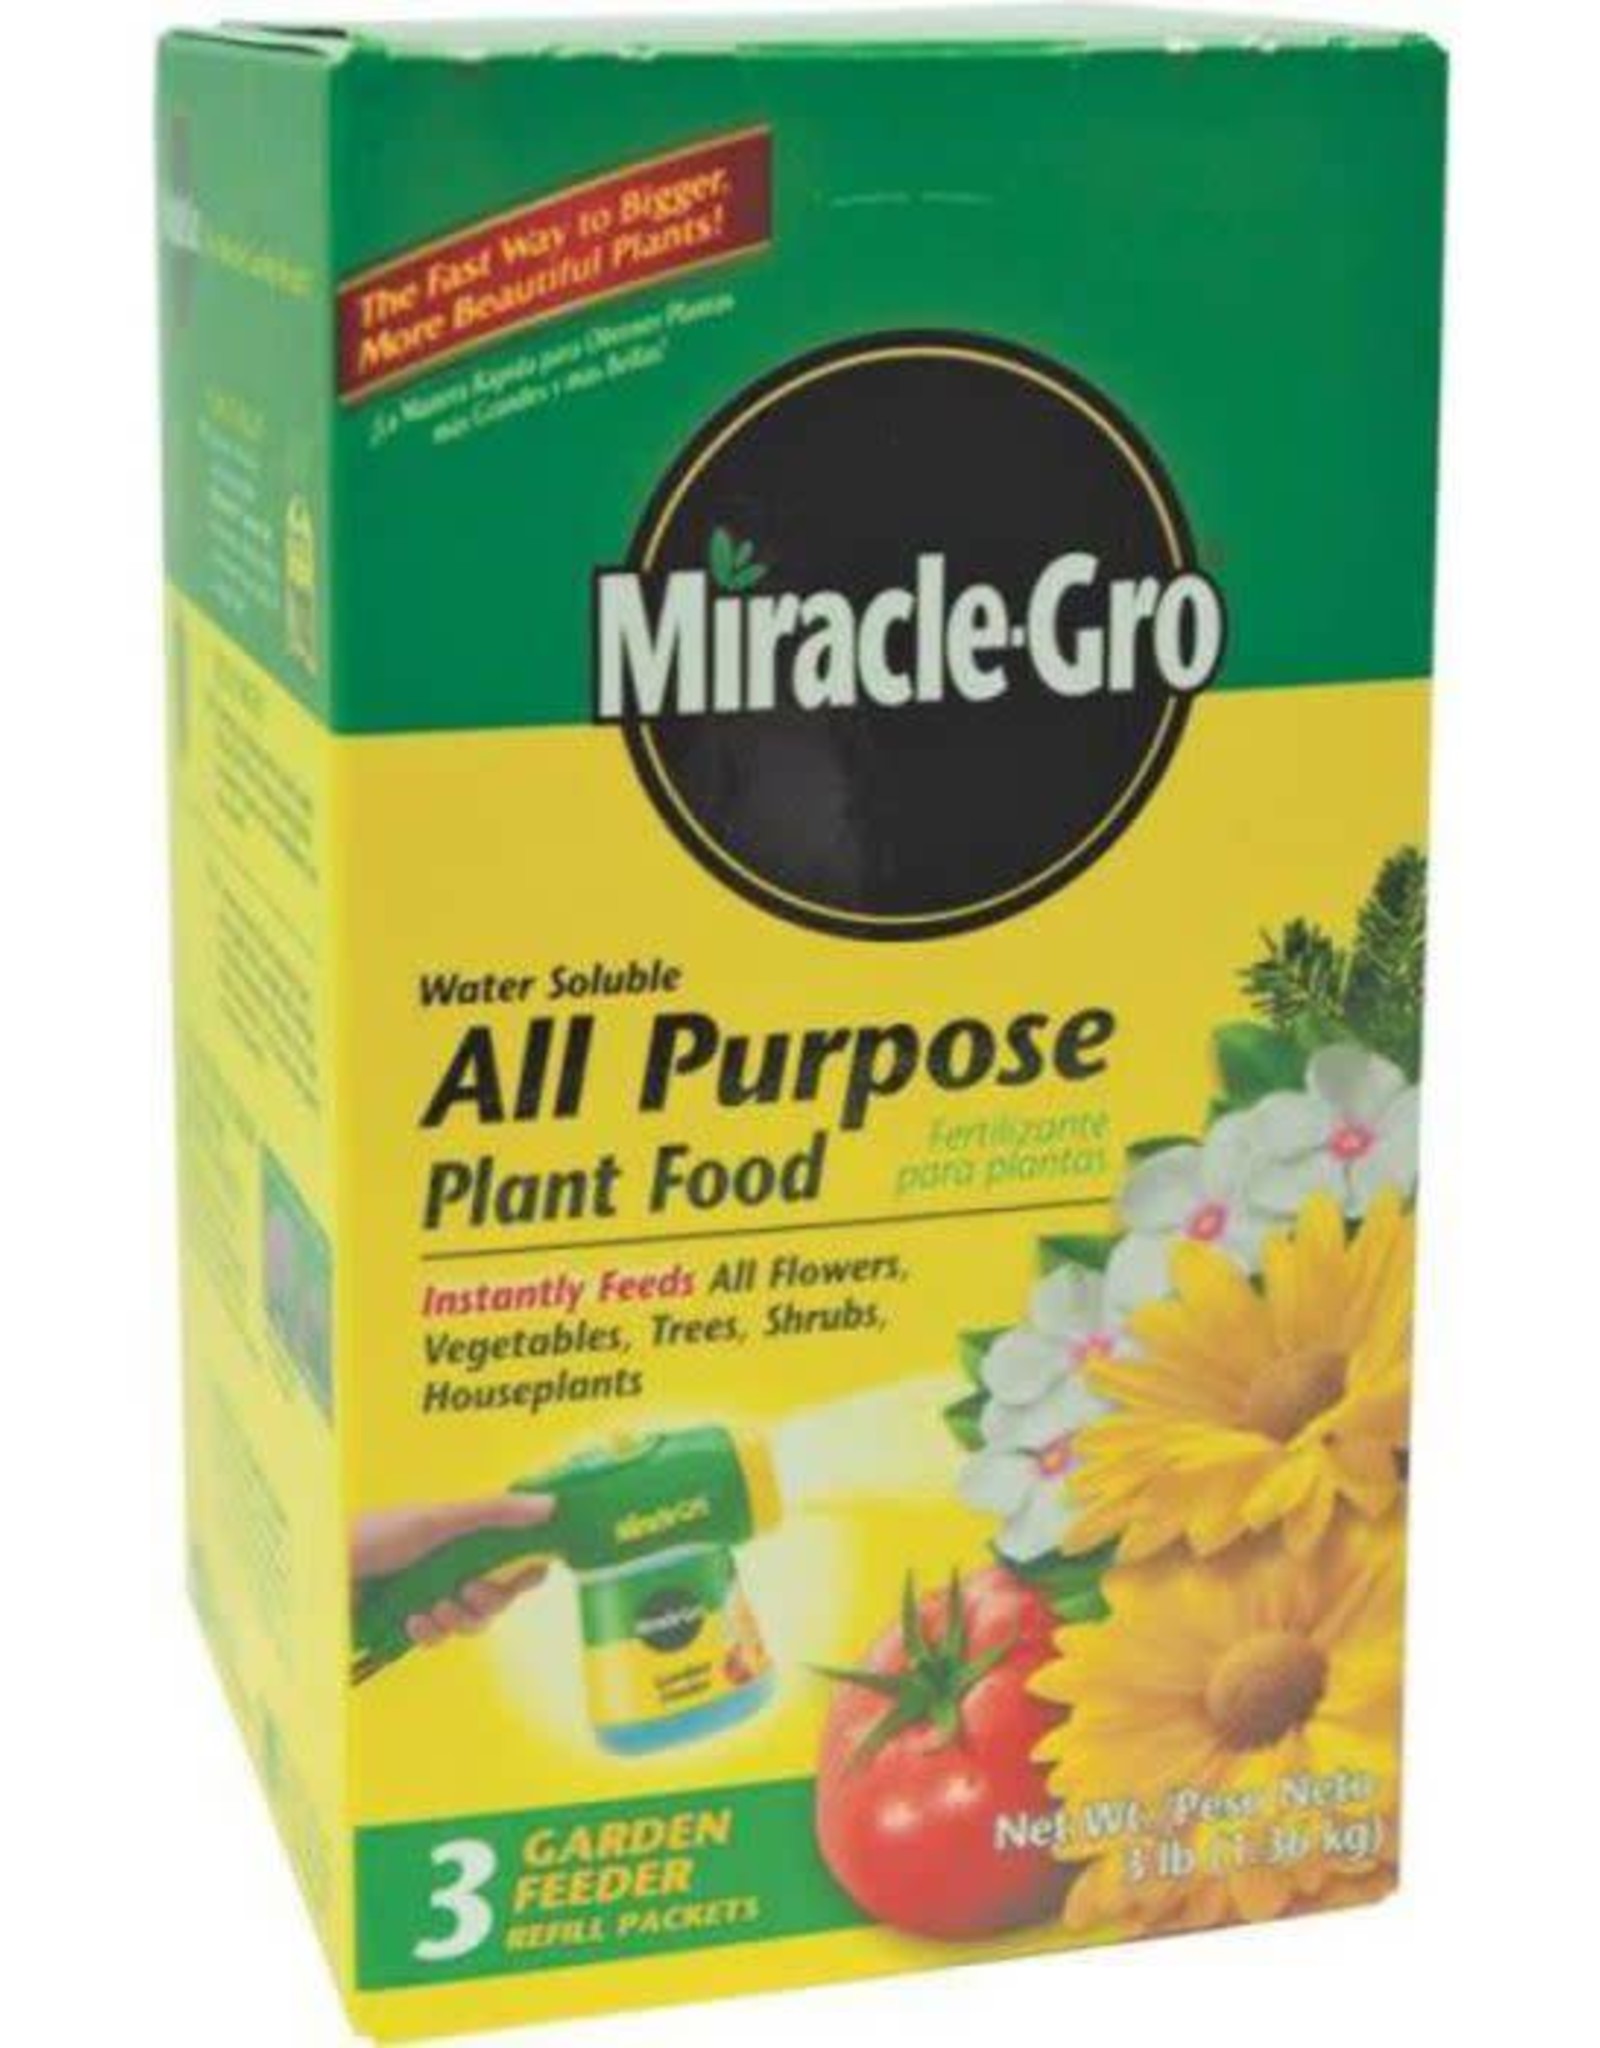 SCOTTS MIRACLE GRO PROD Miracle-Gro All Purpose 24-8-16 3lb